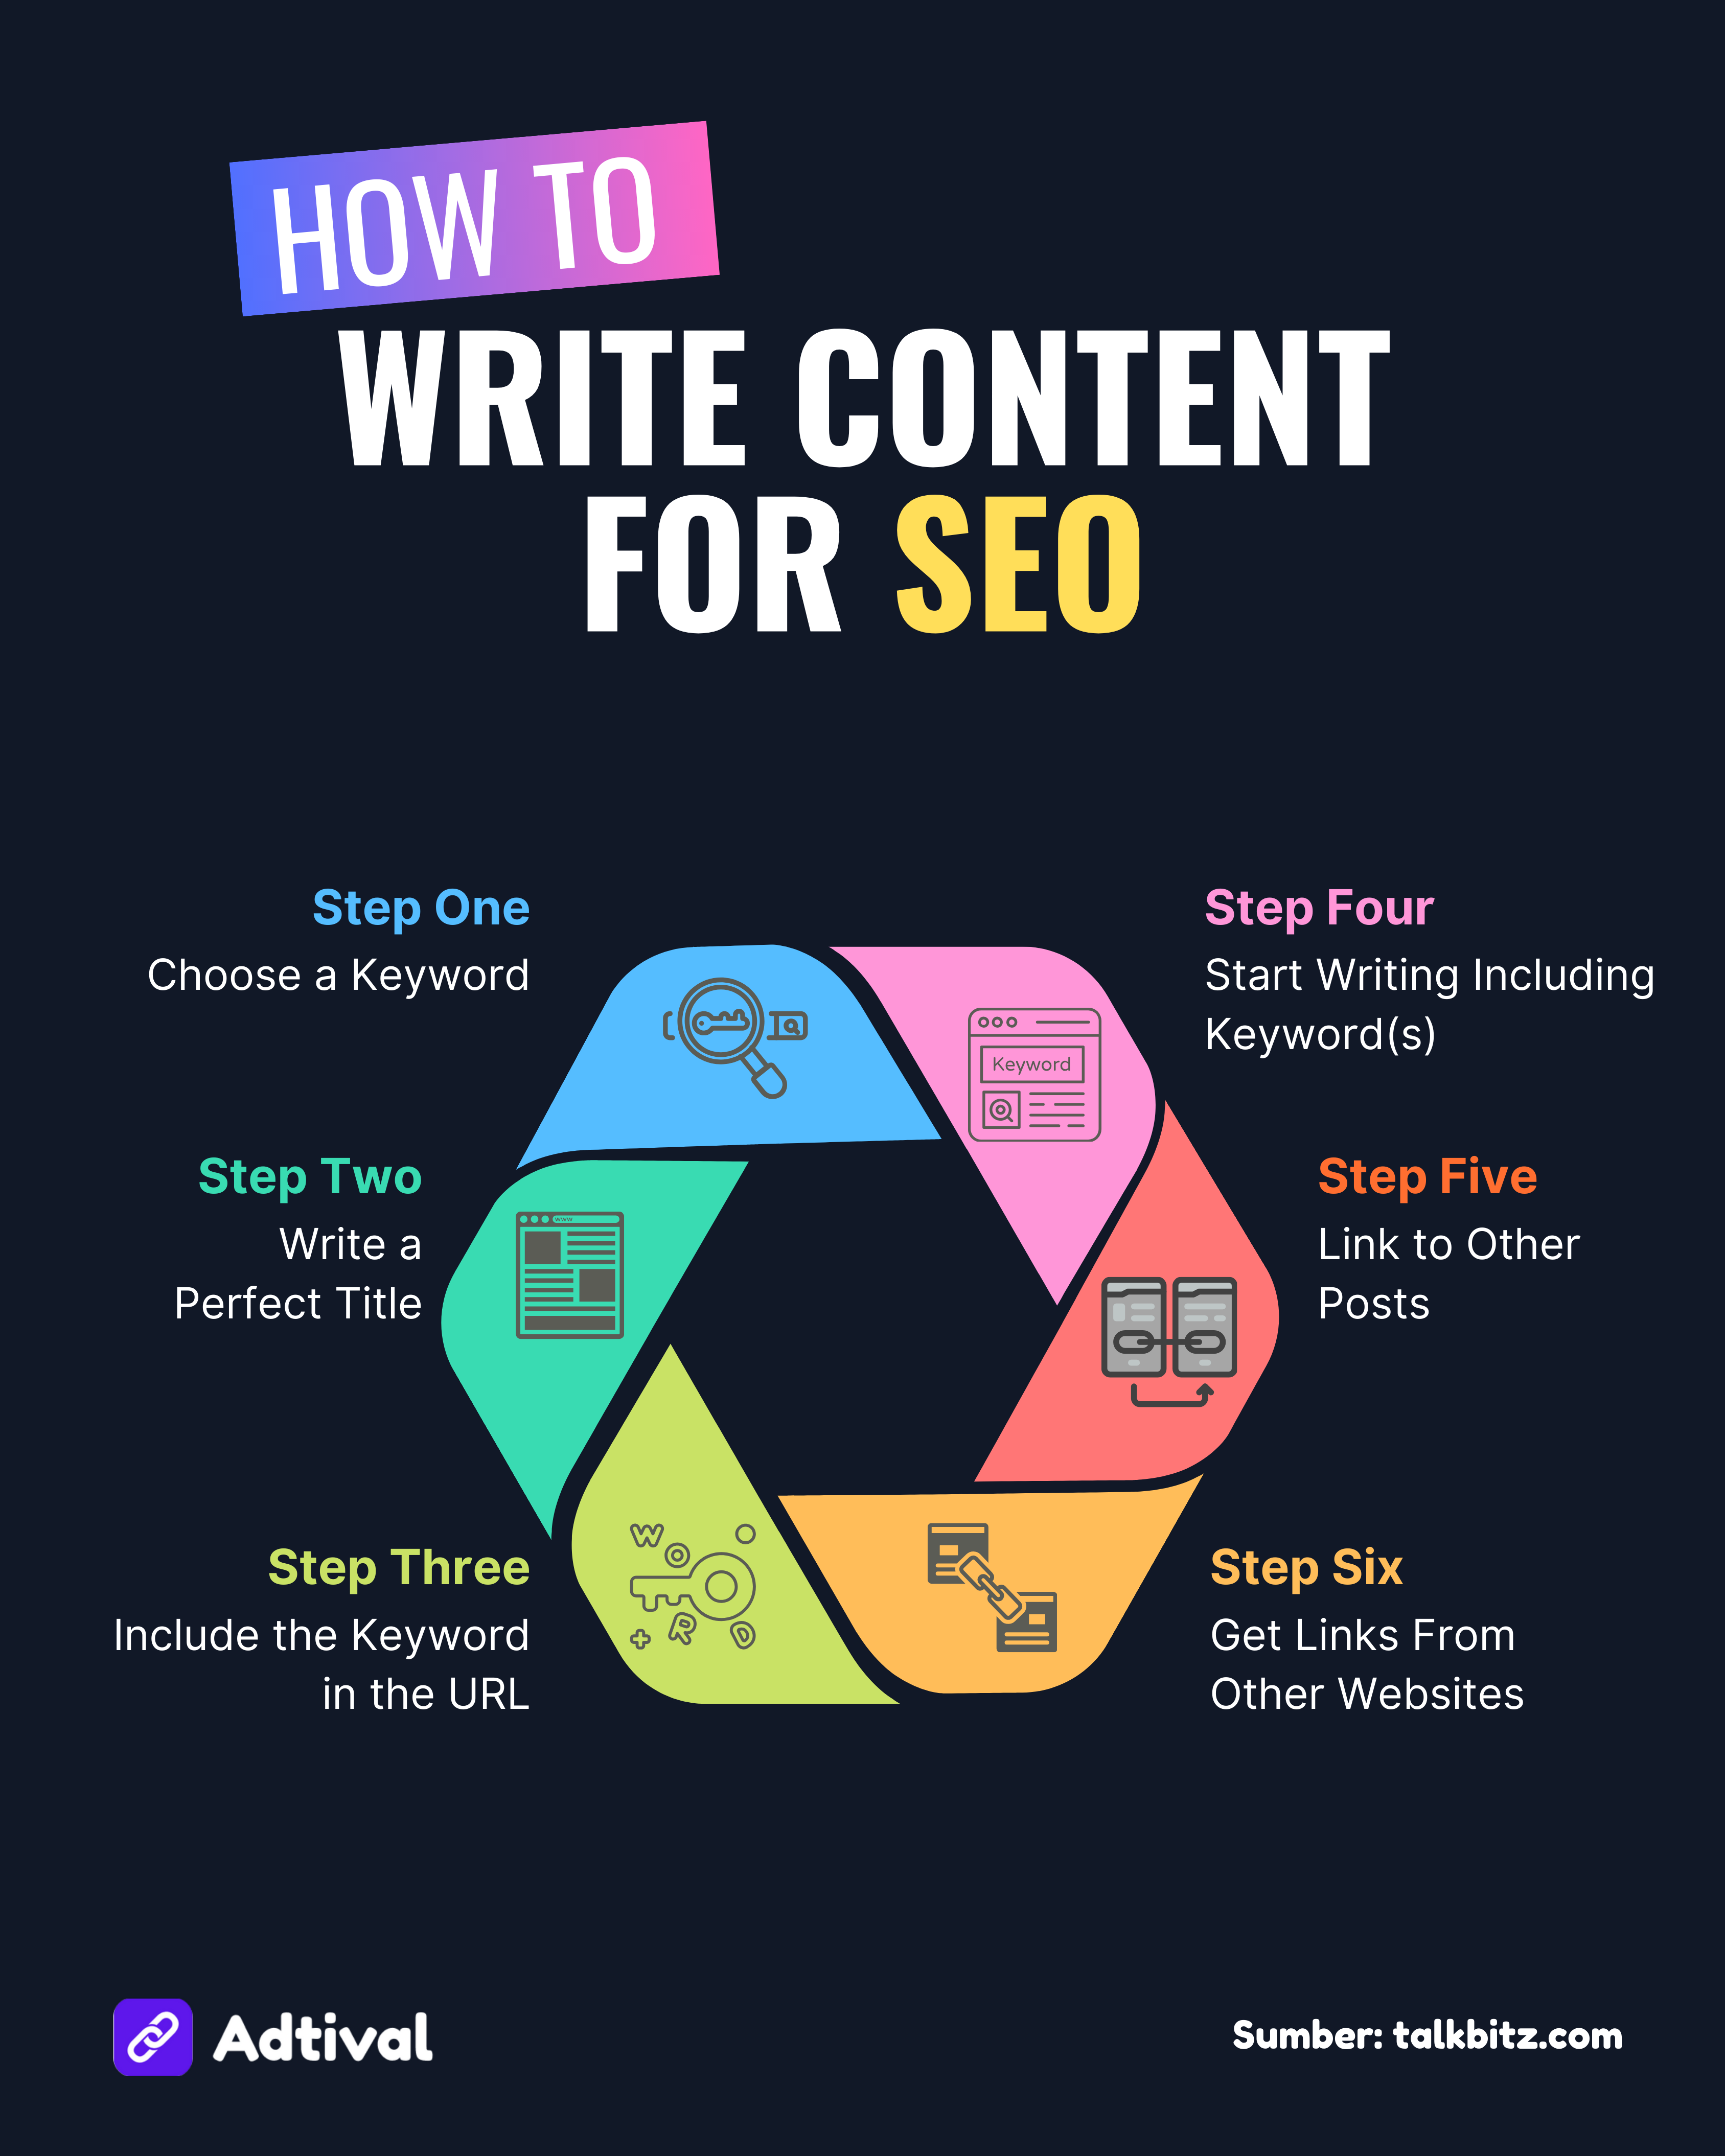 How to Write Content for SEO